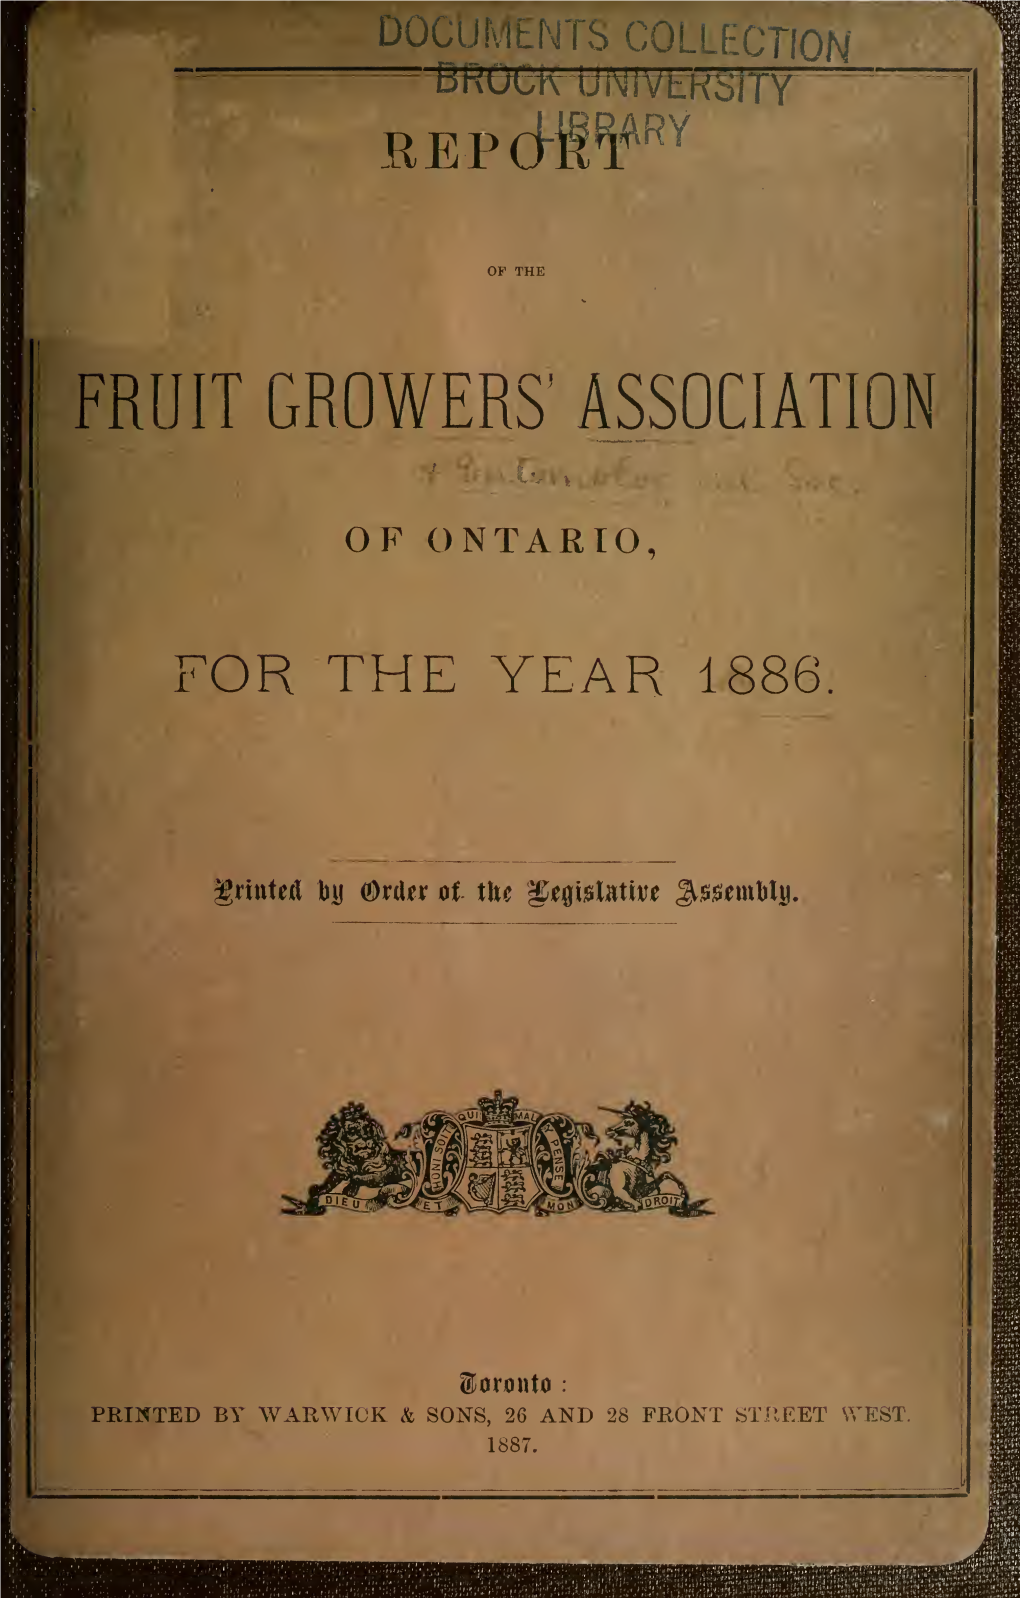 Report of the Fruit Growers' Association of Ontario for the Year